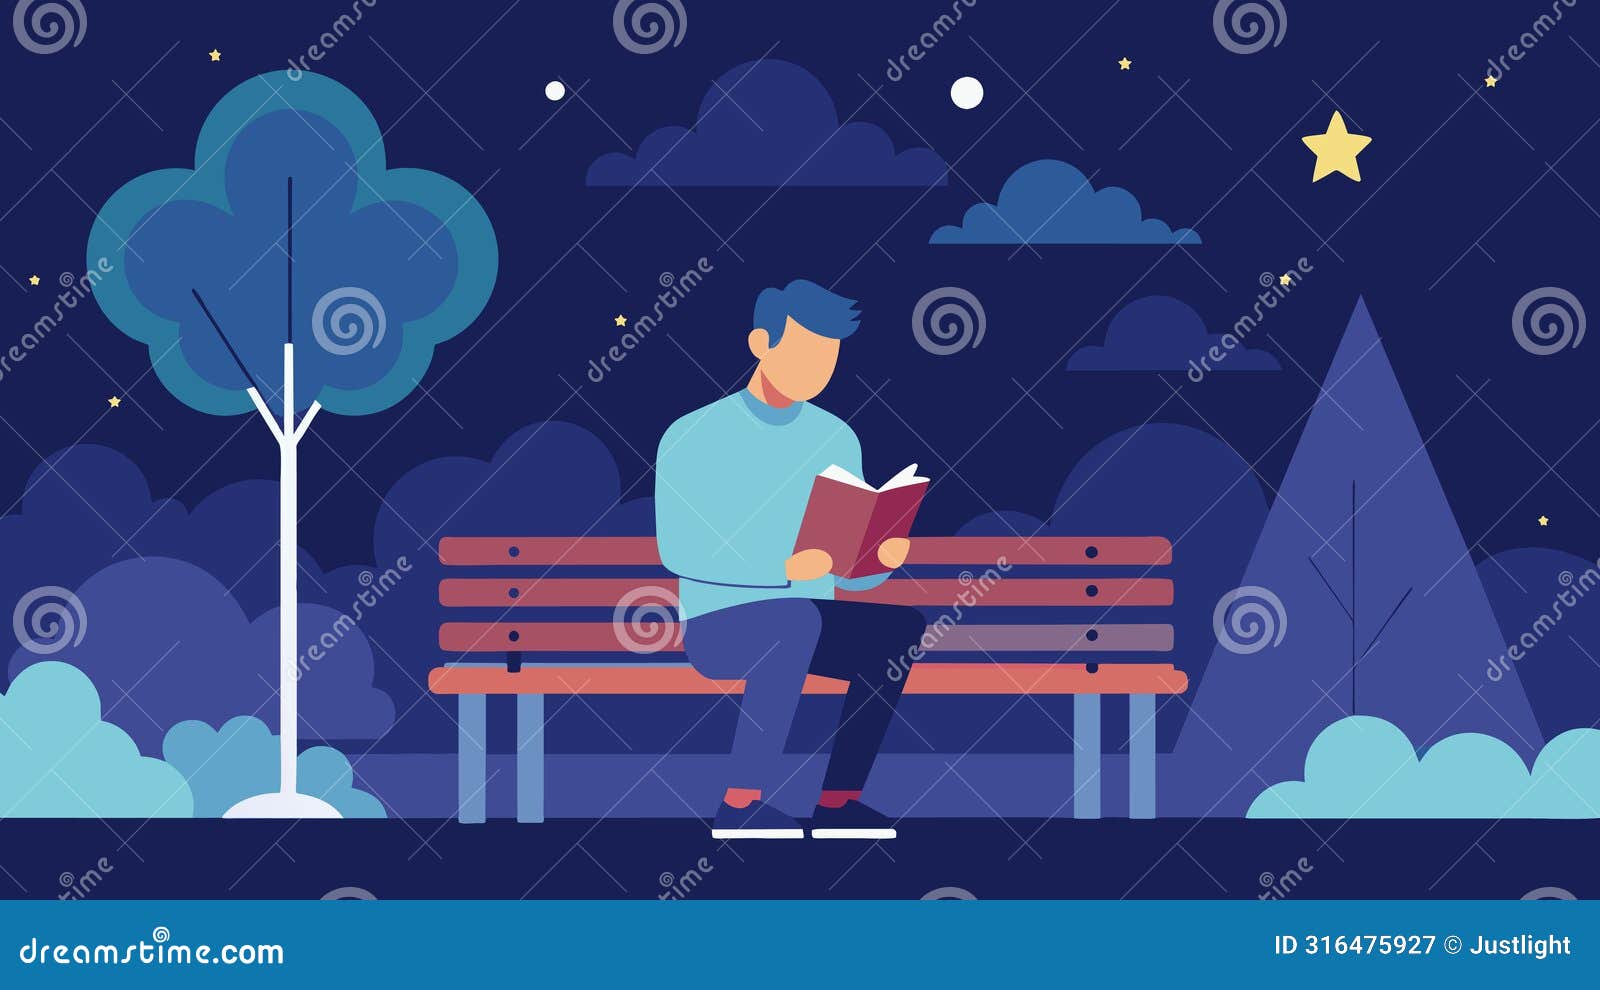 a simple yet poignant portrayal of a lone poet sitting on a park bench under a starry sky reading a poem that reflects